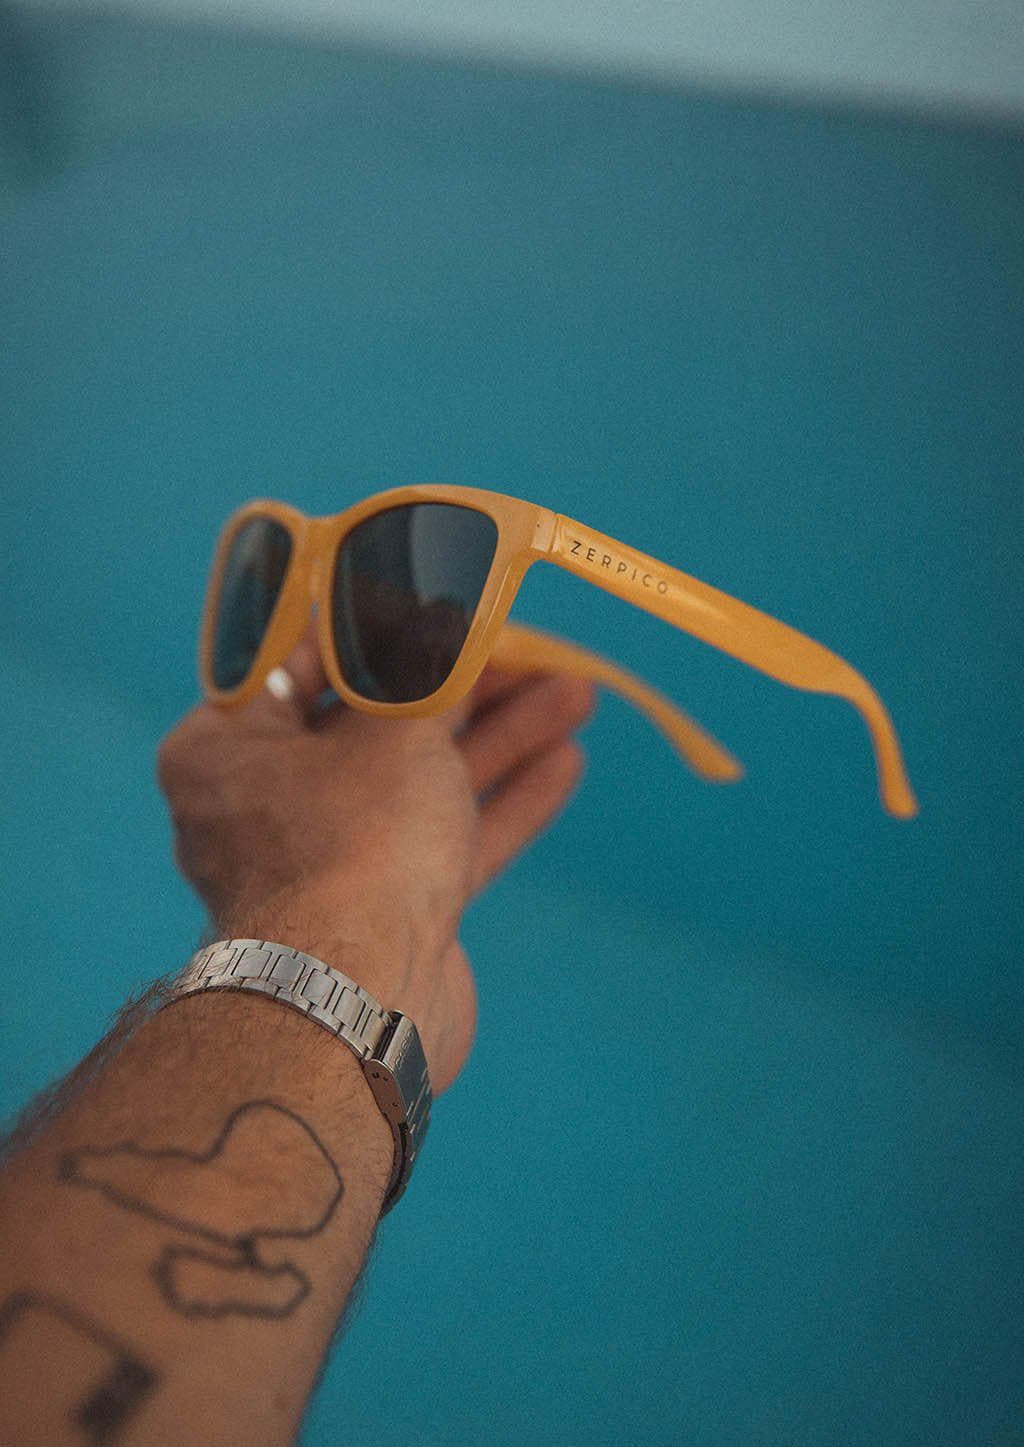 Our Mood V2 is an improved version of our last wayfarers. Plastic body for great quality and durabilty. This is Lemon with yellow frame and green lenses.  Lifestyle photo by the pool.